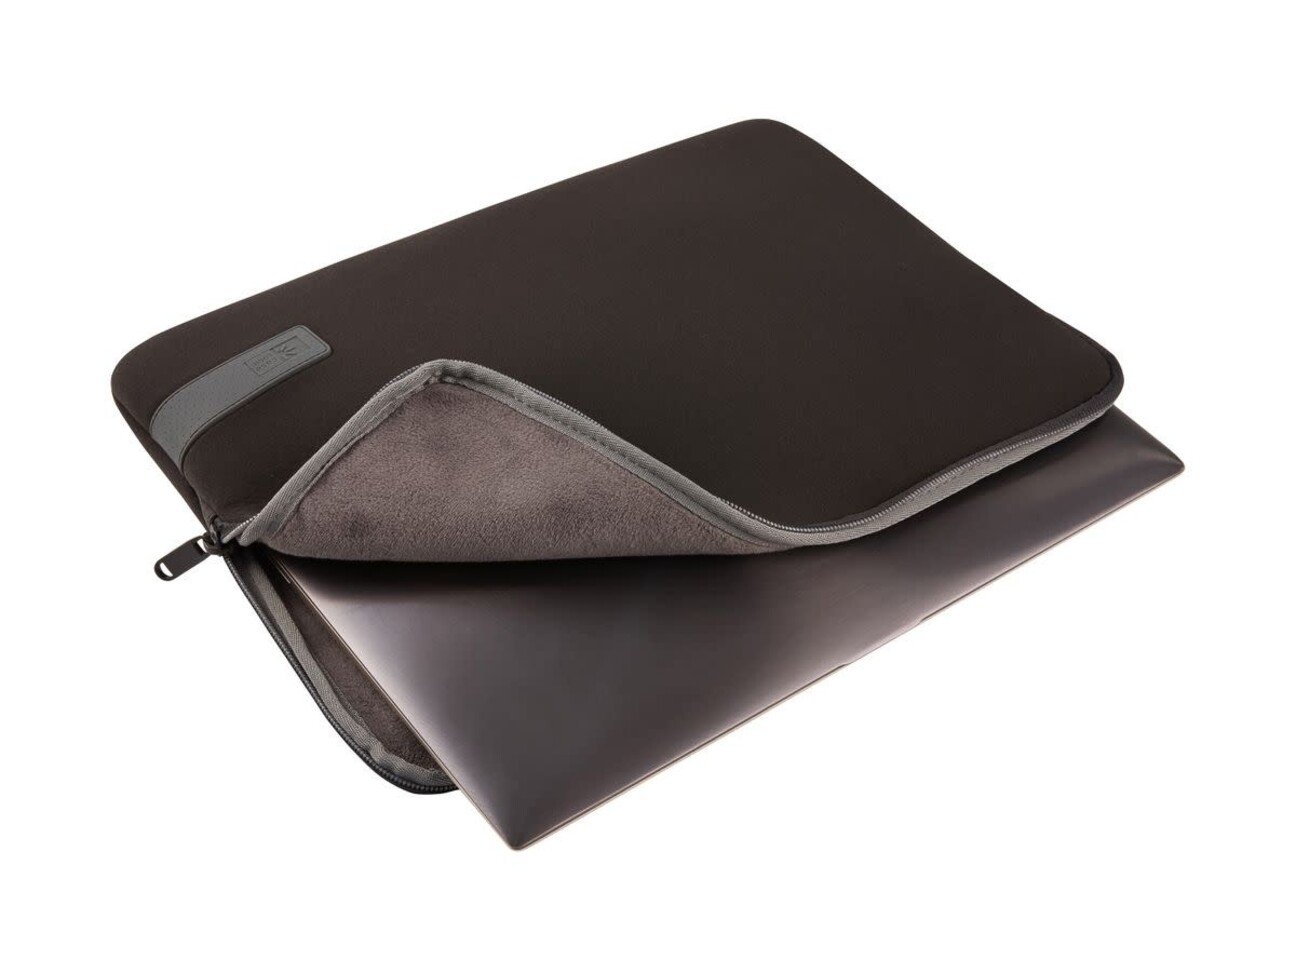 iPhone Leather Wallet with MagSafe - kite+key, Rutgers Tech Store